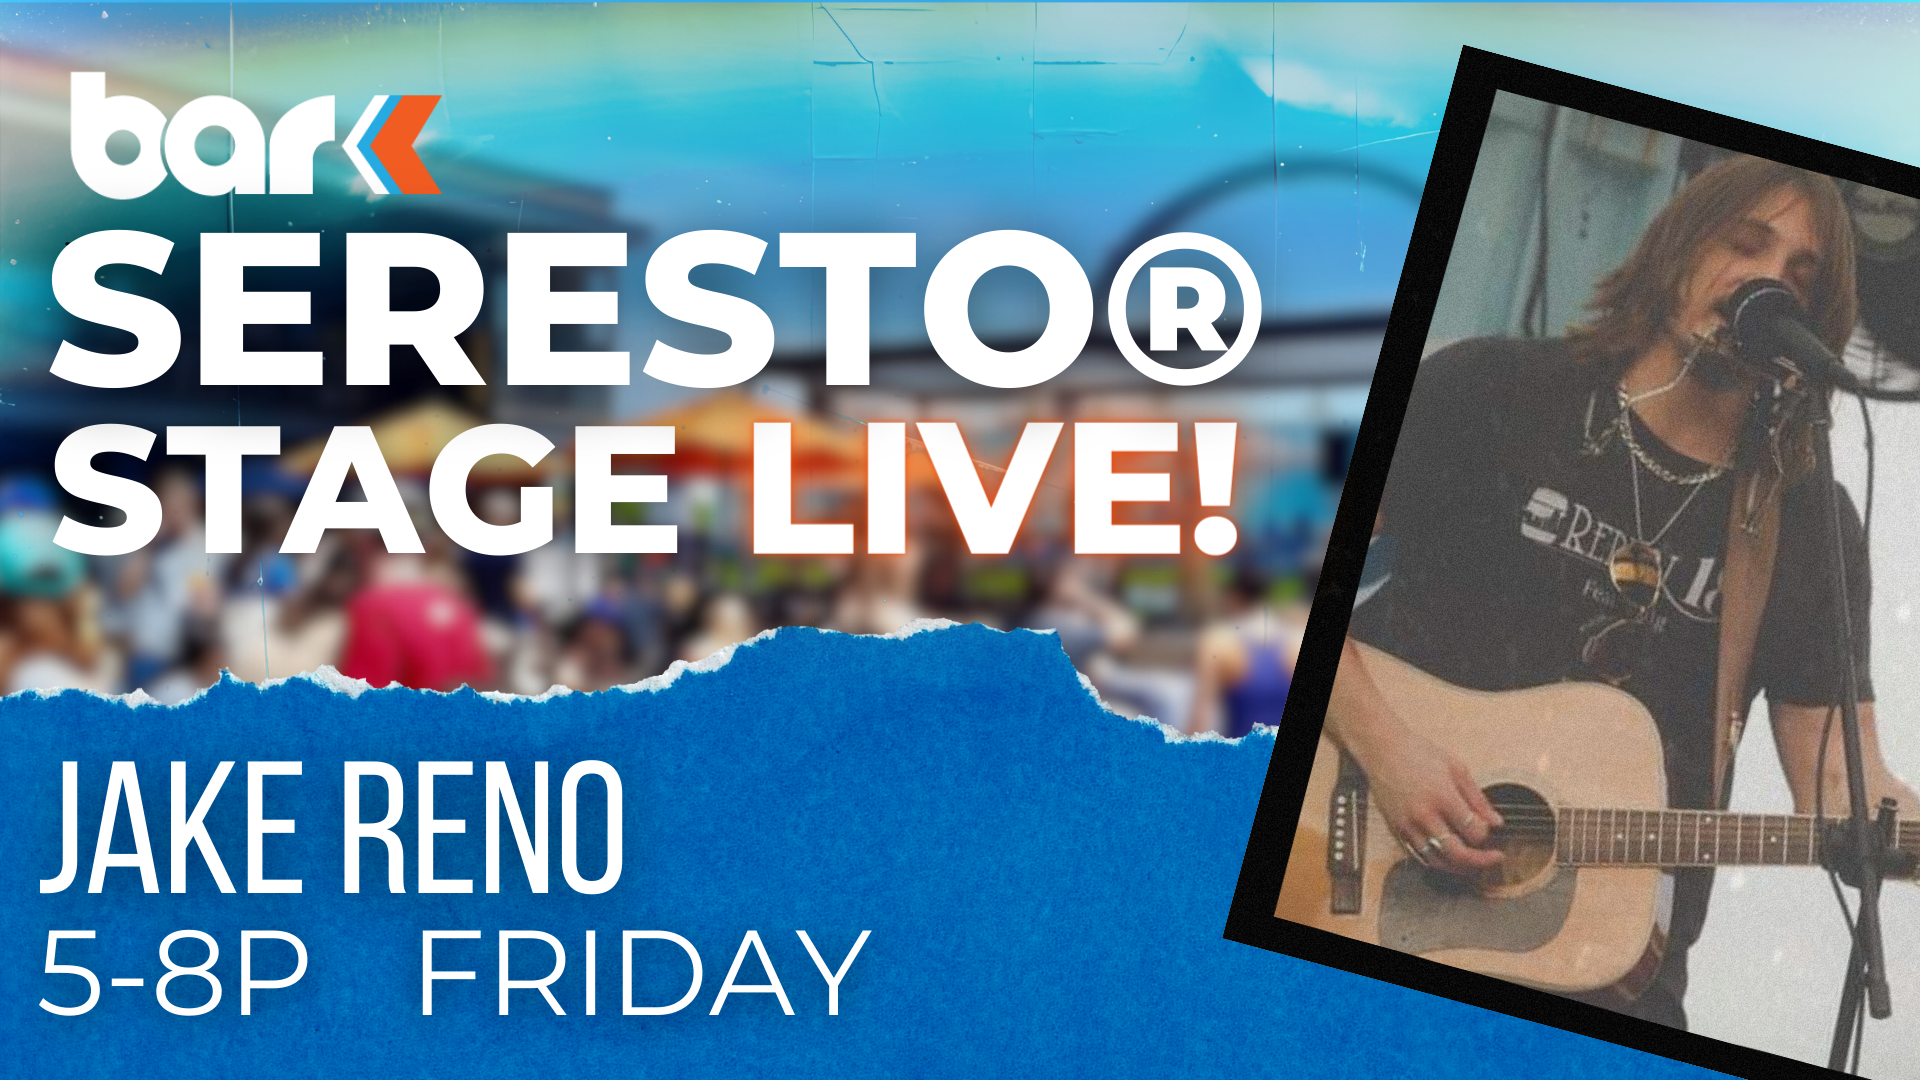 Jake Reno at the Bar K Seresto Stage Live! Friday from 5 to 8 pm.